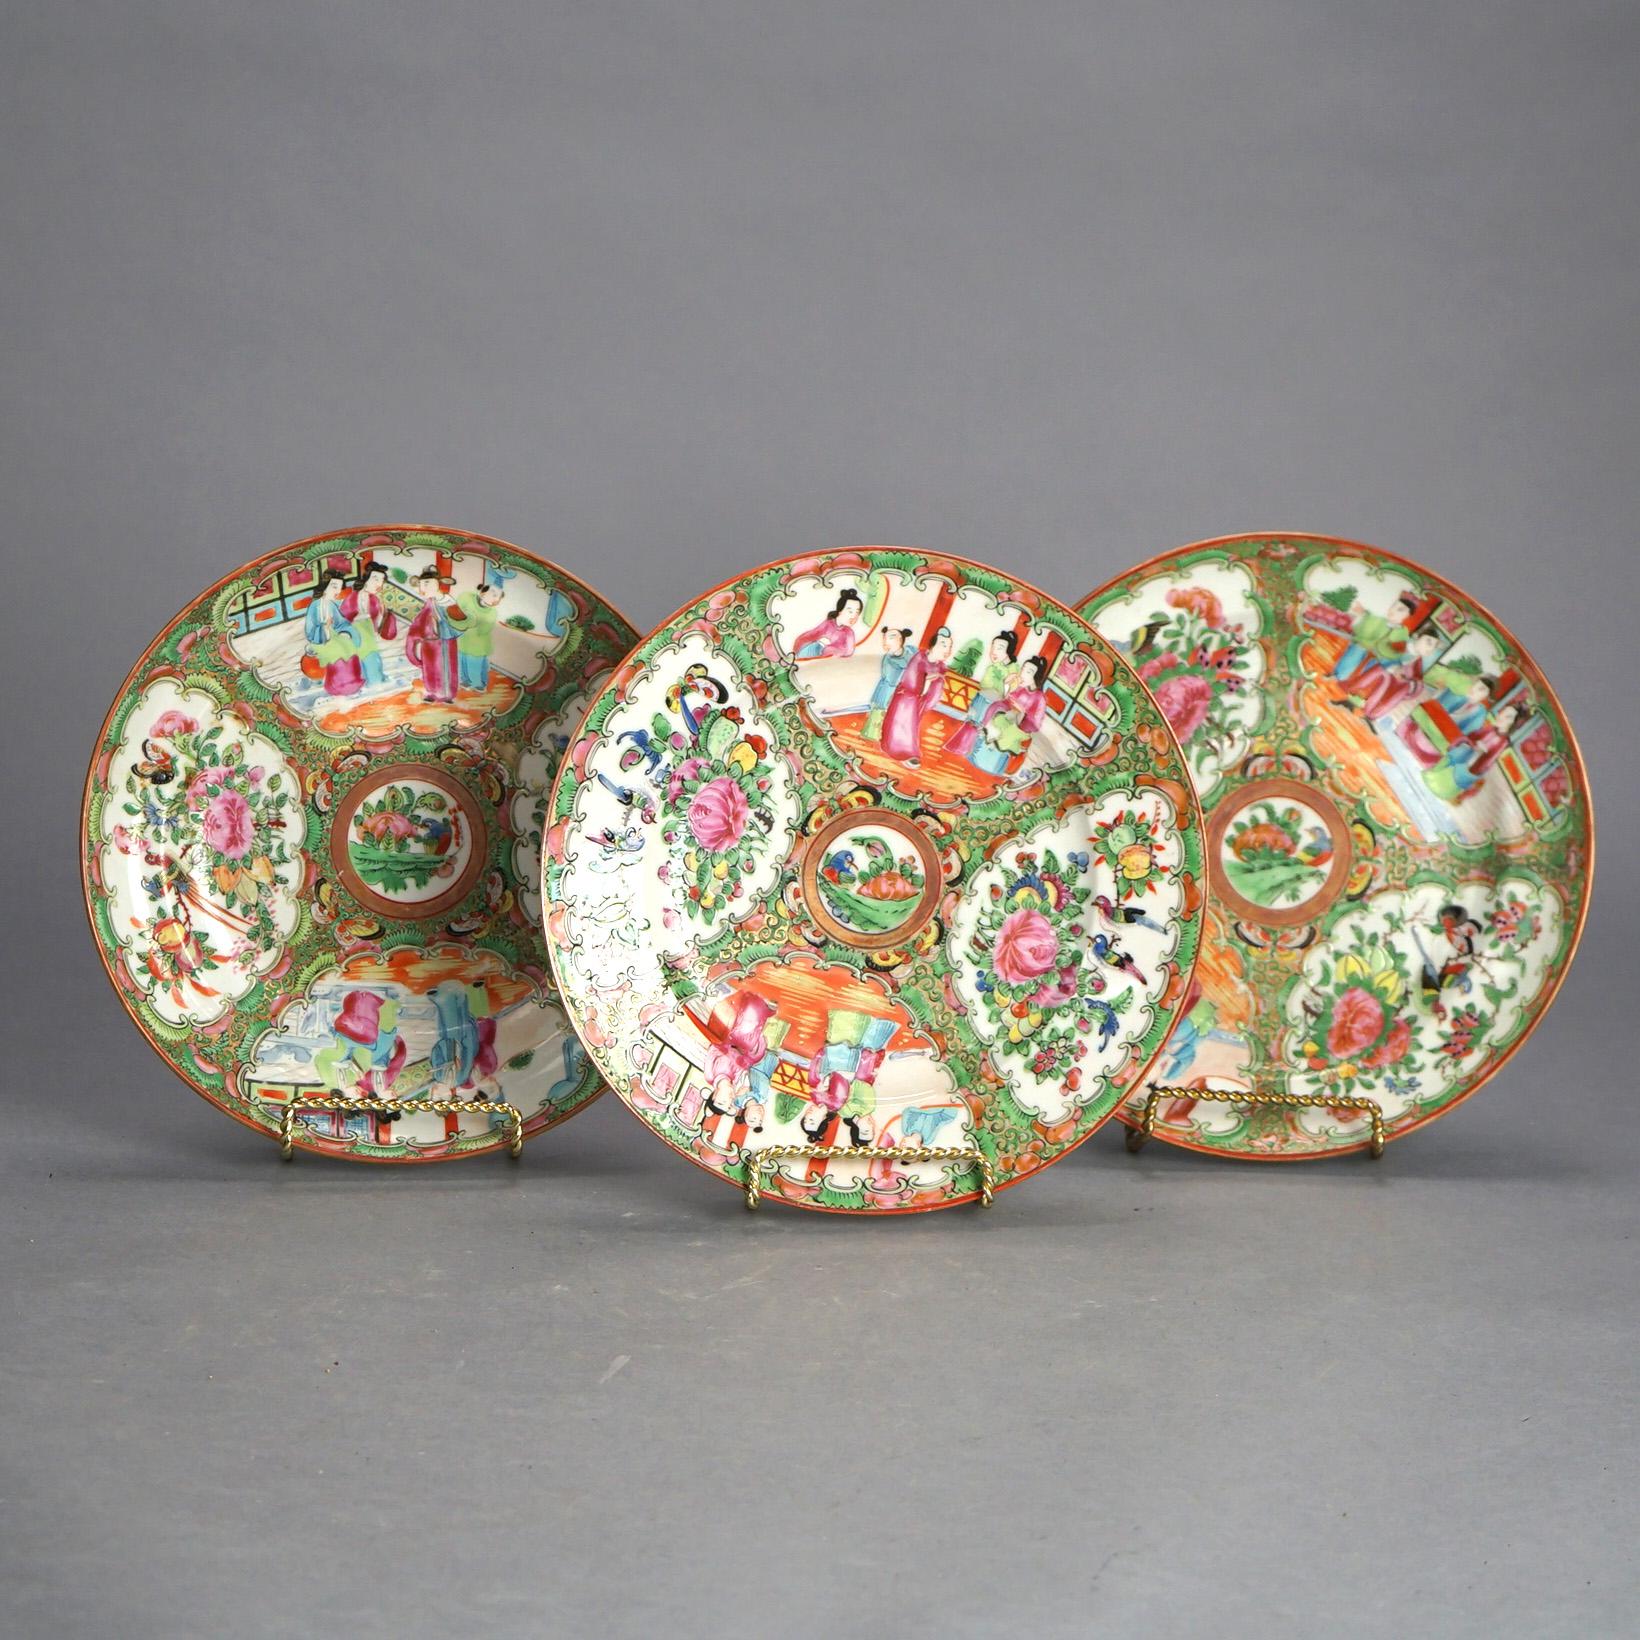 Three Antique Chinese Rose Medallion Porcelain Low Bowls with Genre and Garden Scenes C1900

Measures - 1.25